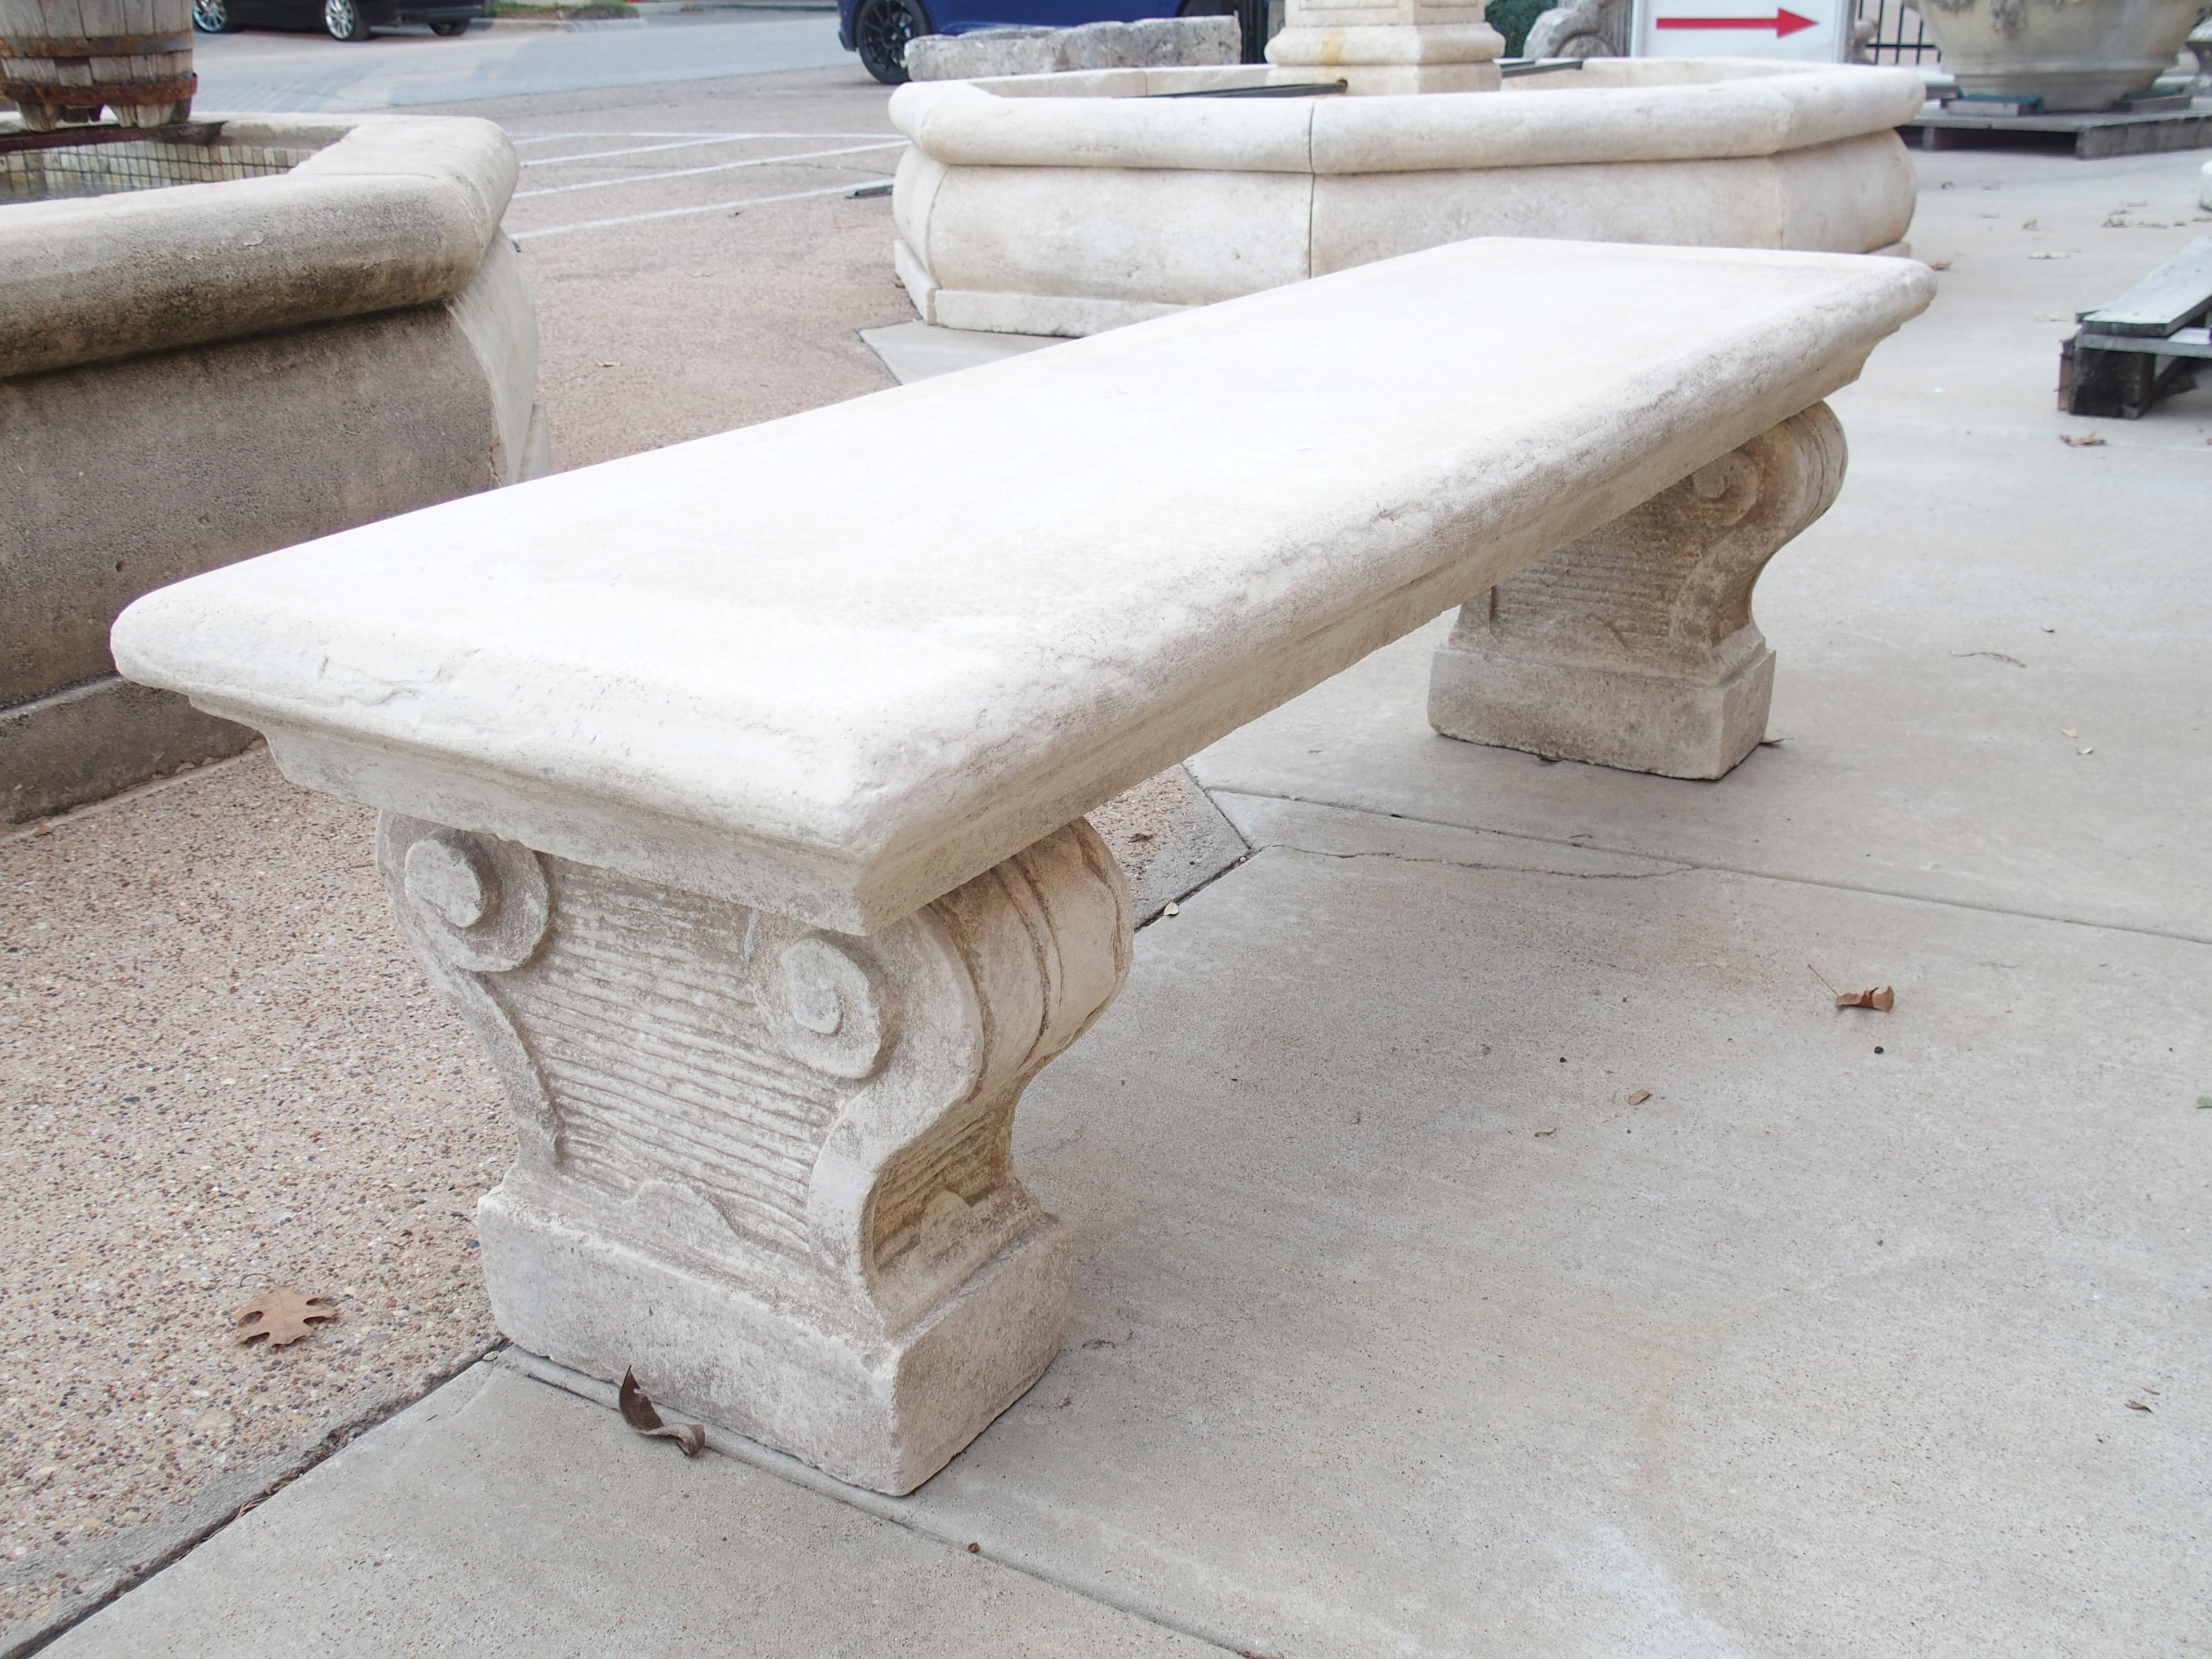 Consisting of reconstituted limestone, this garden bench was cast in Southern Italy. All three pieces of stone have a cream-colored finish with areas of white accents. The four-inch thick seat has been given a cavetto molding on all four sides,